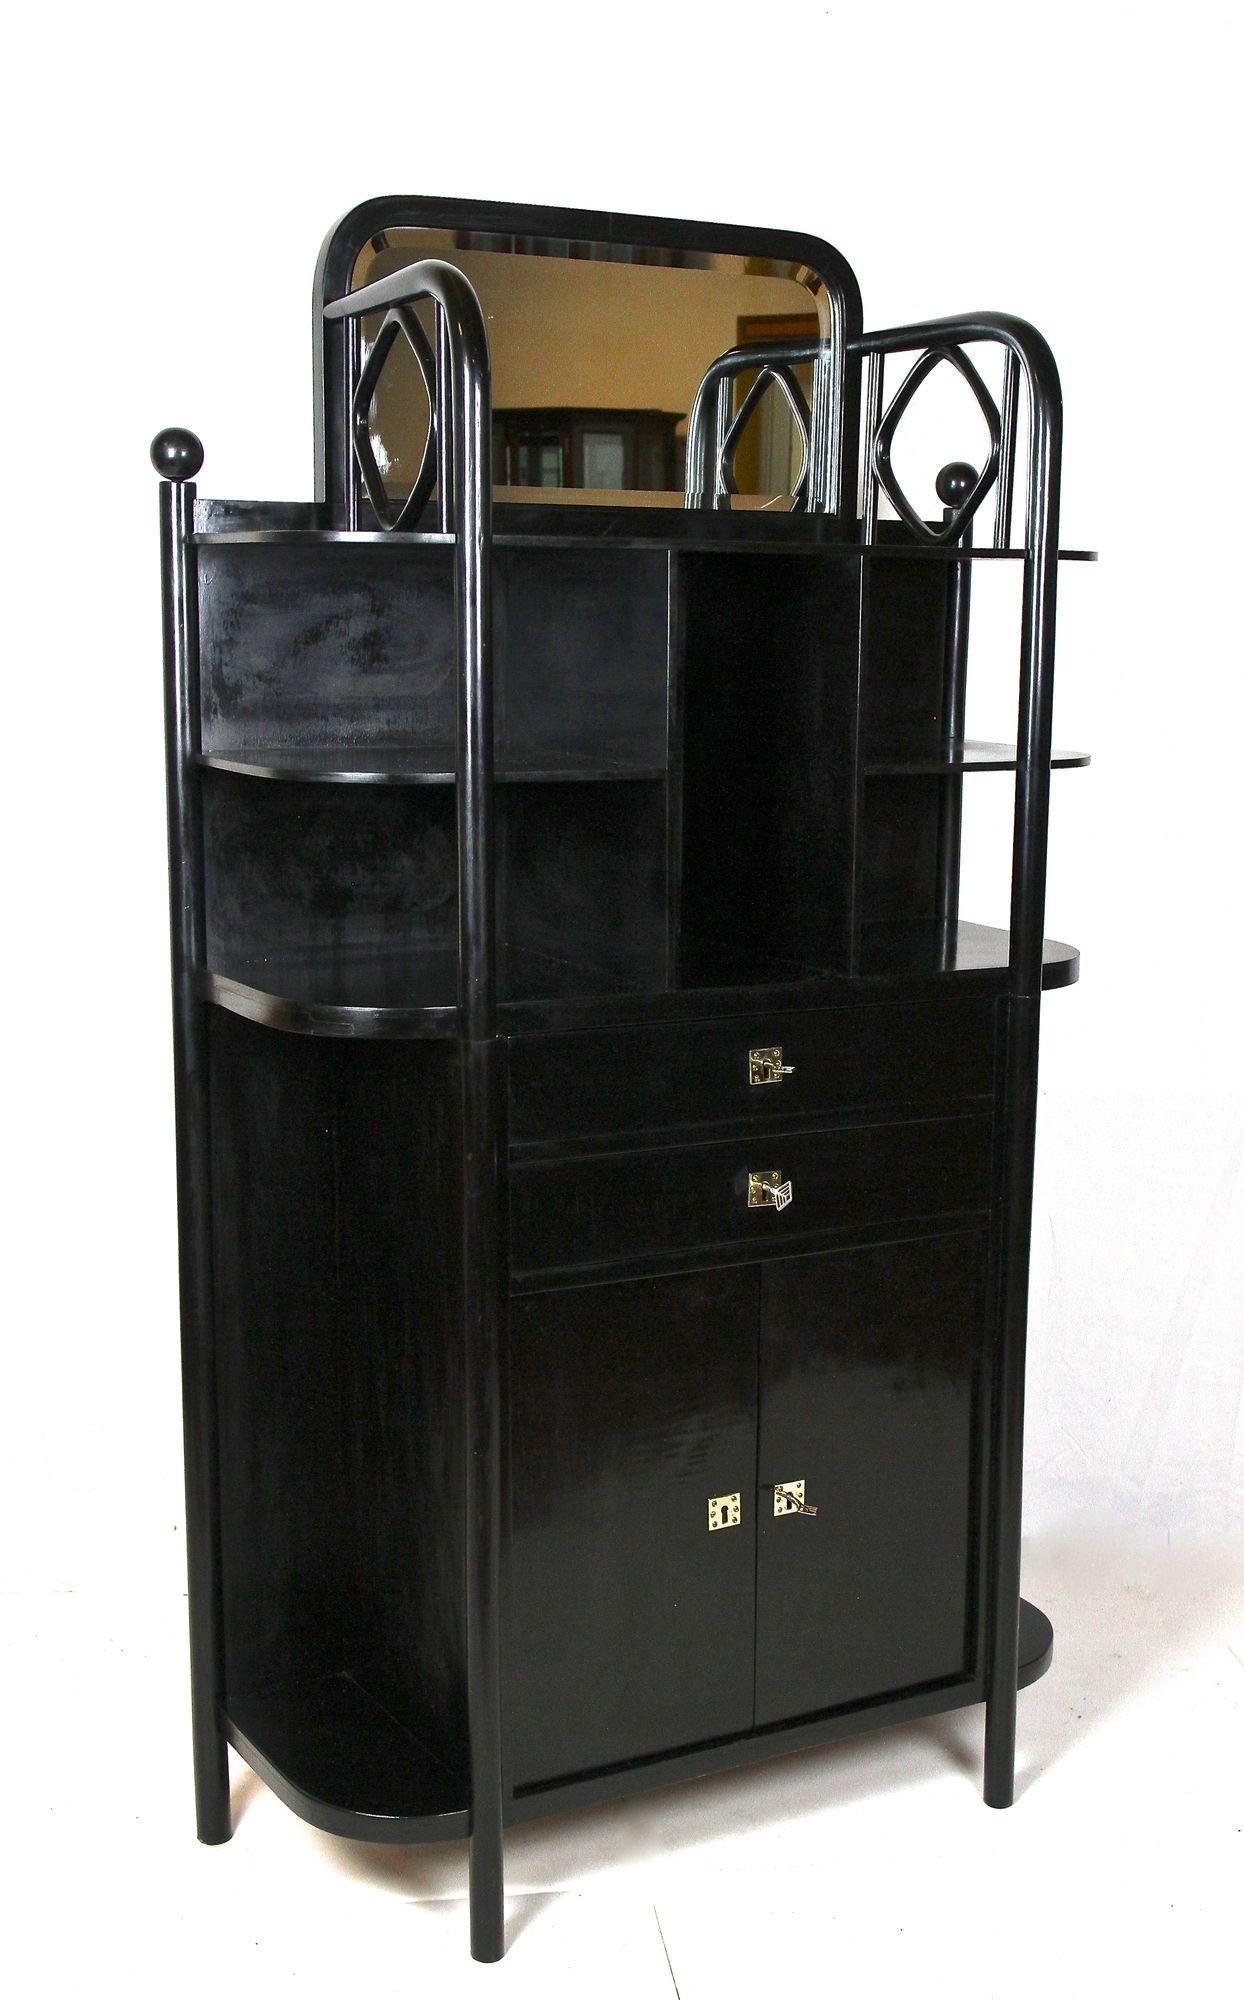 Black Art Nouveau Display Cabinet by Josef Hoffmann for Thonet, AT ca. 1905 For Sale 8